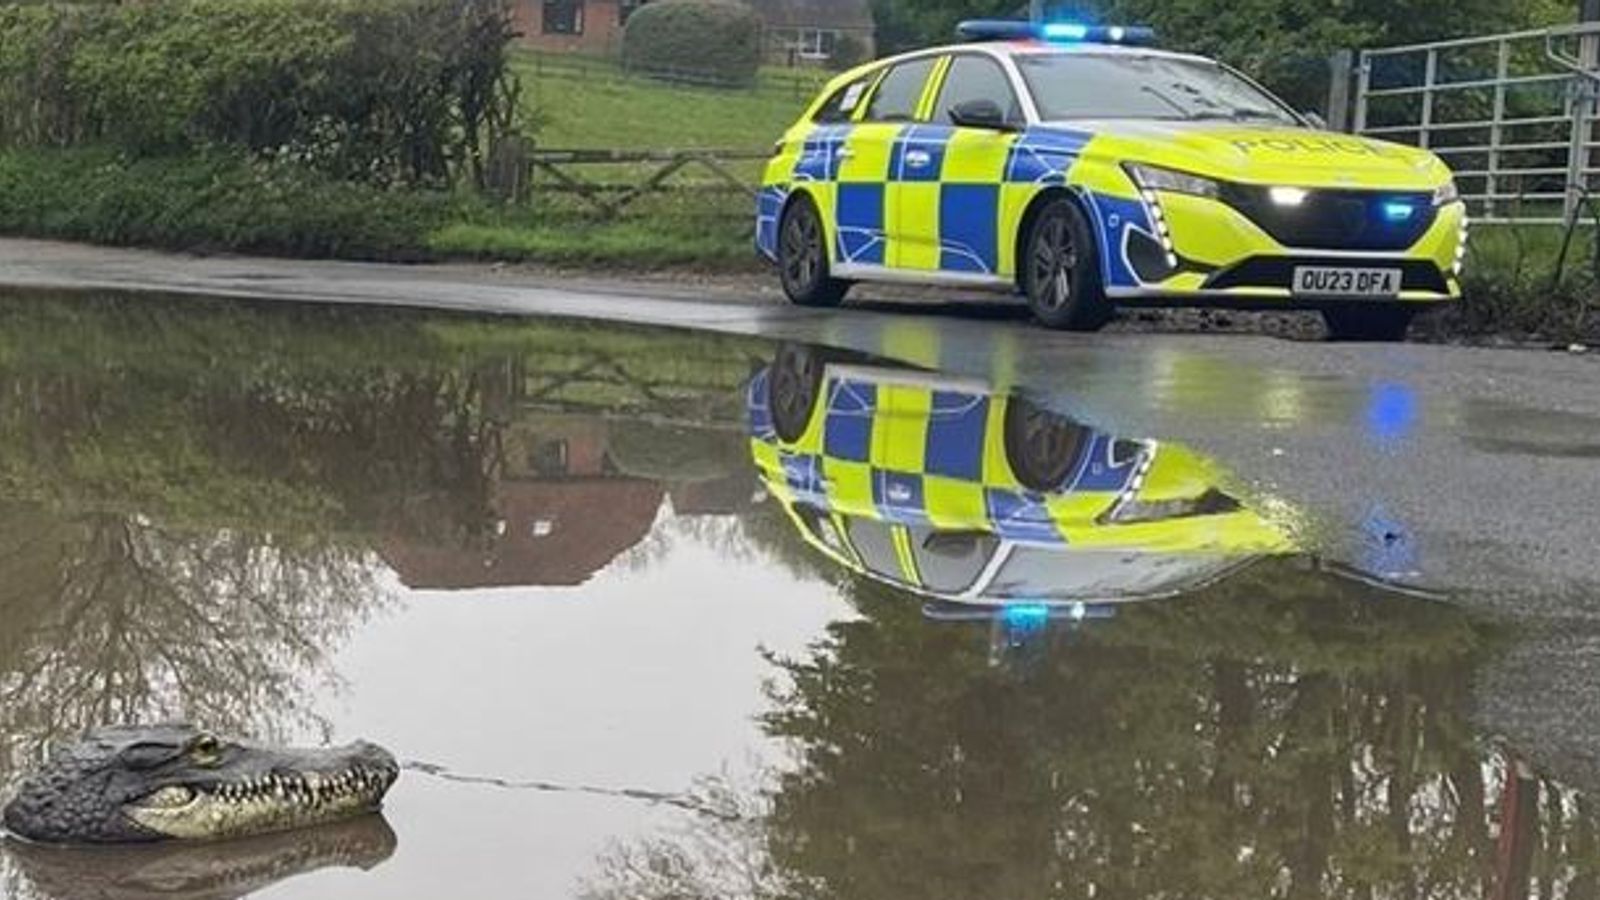 Crocodile: Reports of reptile in Buckinghamshire village investigated by 'brave' Thames Valley Police